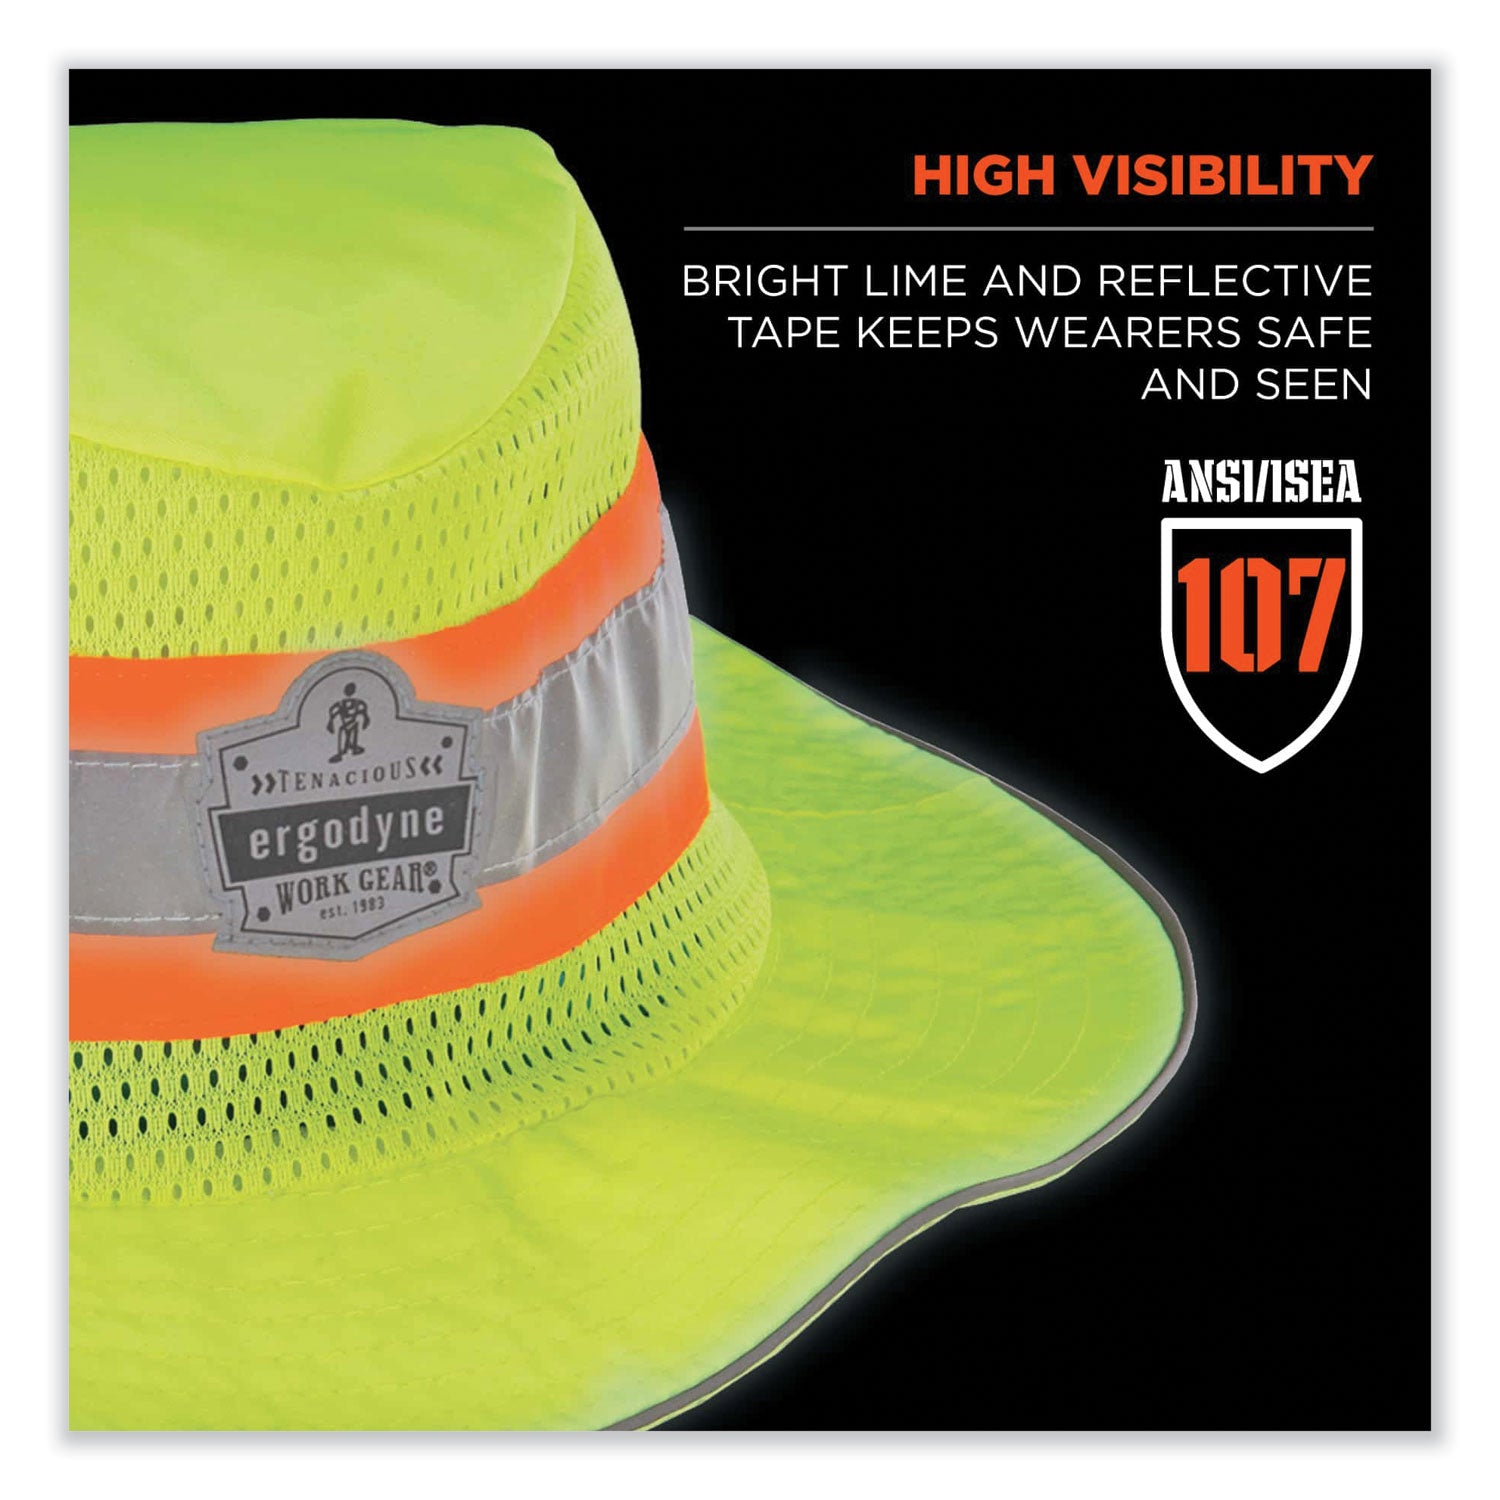 chill-its-8935ct-hi-vis-pva-ranger-sun-hat-small-medium-lime-ships-in-1-3-business-days_ego12590 - 4